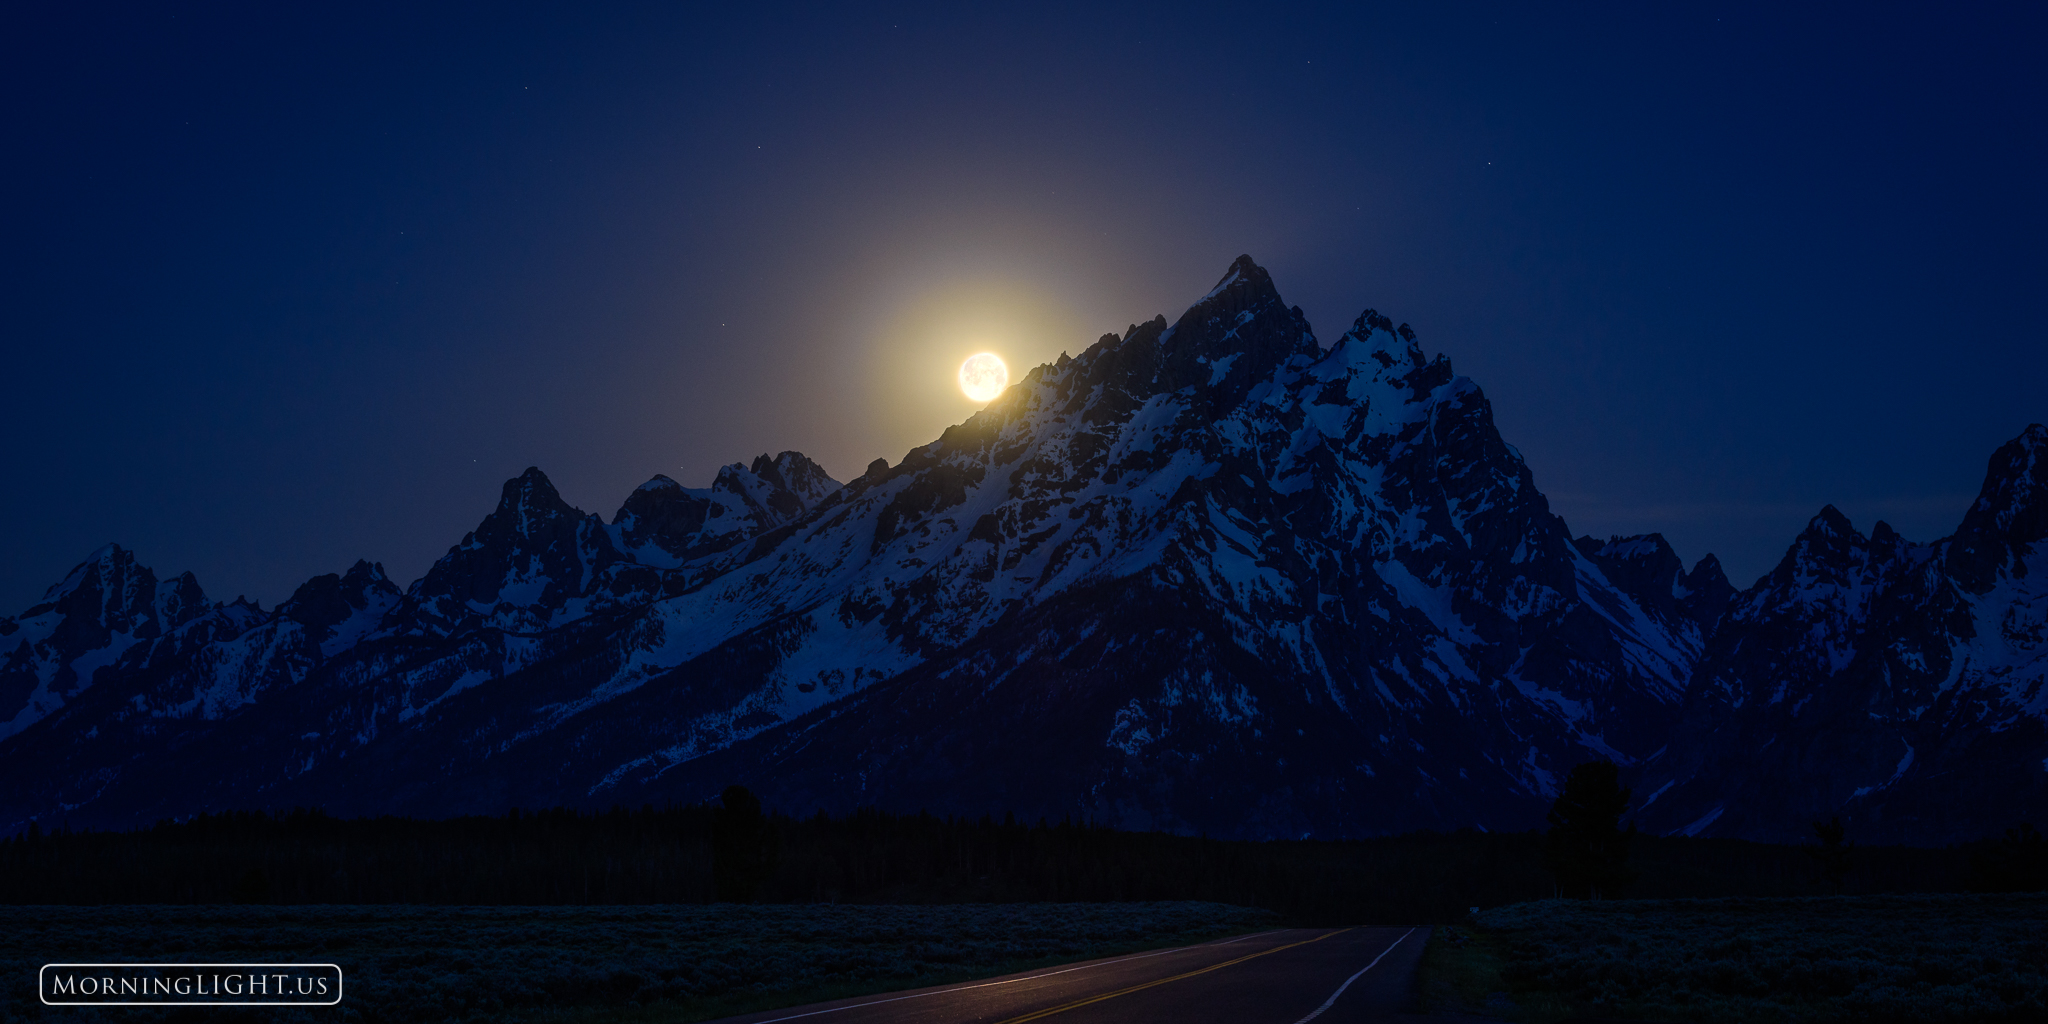 The national park highway heads right towards the dramatic Grand Teton in Grand Teton National Park, Wyoming as the moon sets...